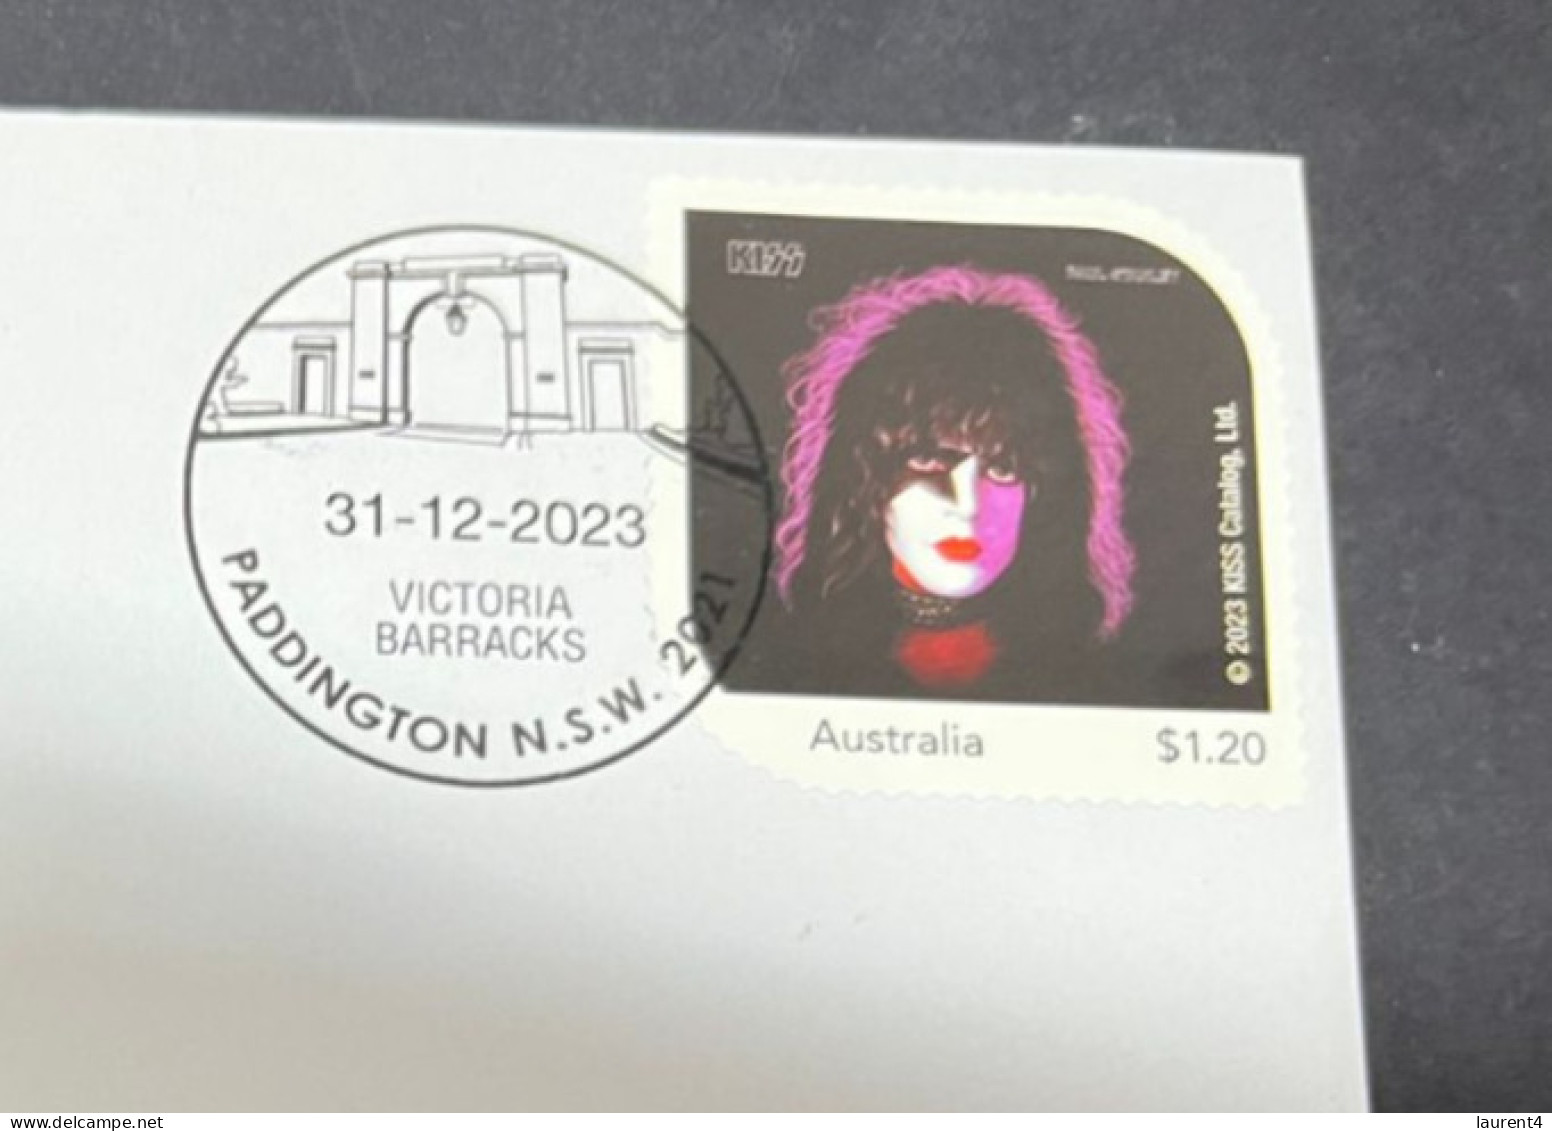 26-3-20234 (4 Y 8) Kiss (music Band) With KISS OZ Stamp (Paul Stanley) - Música